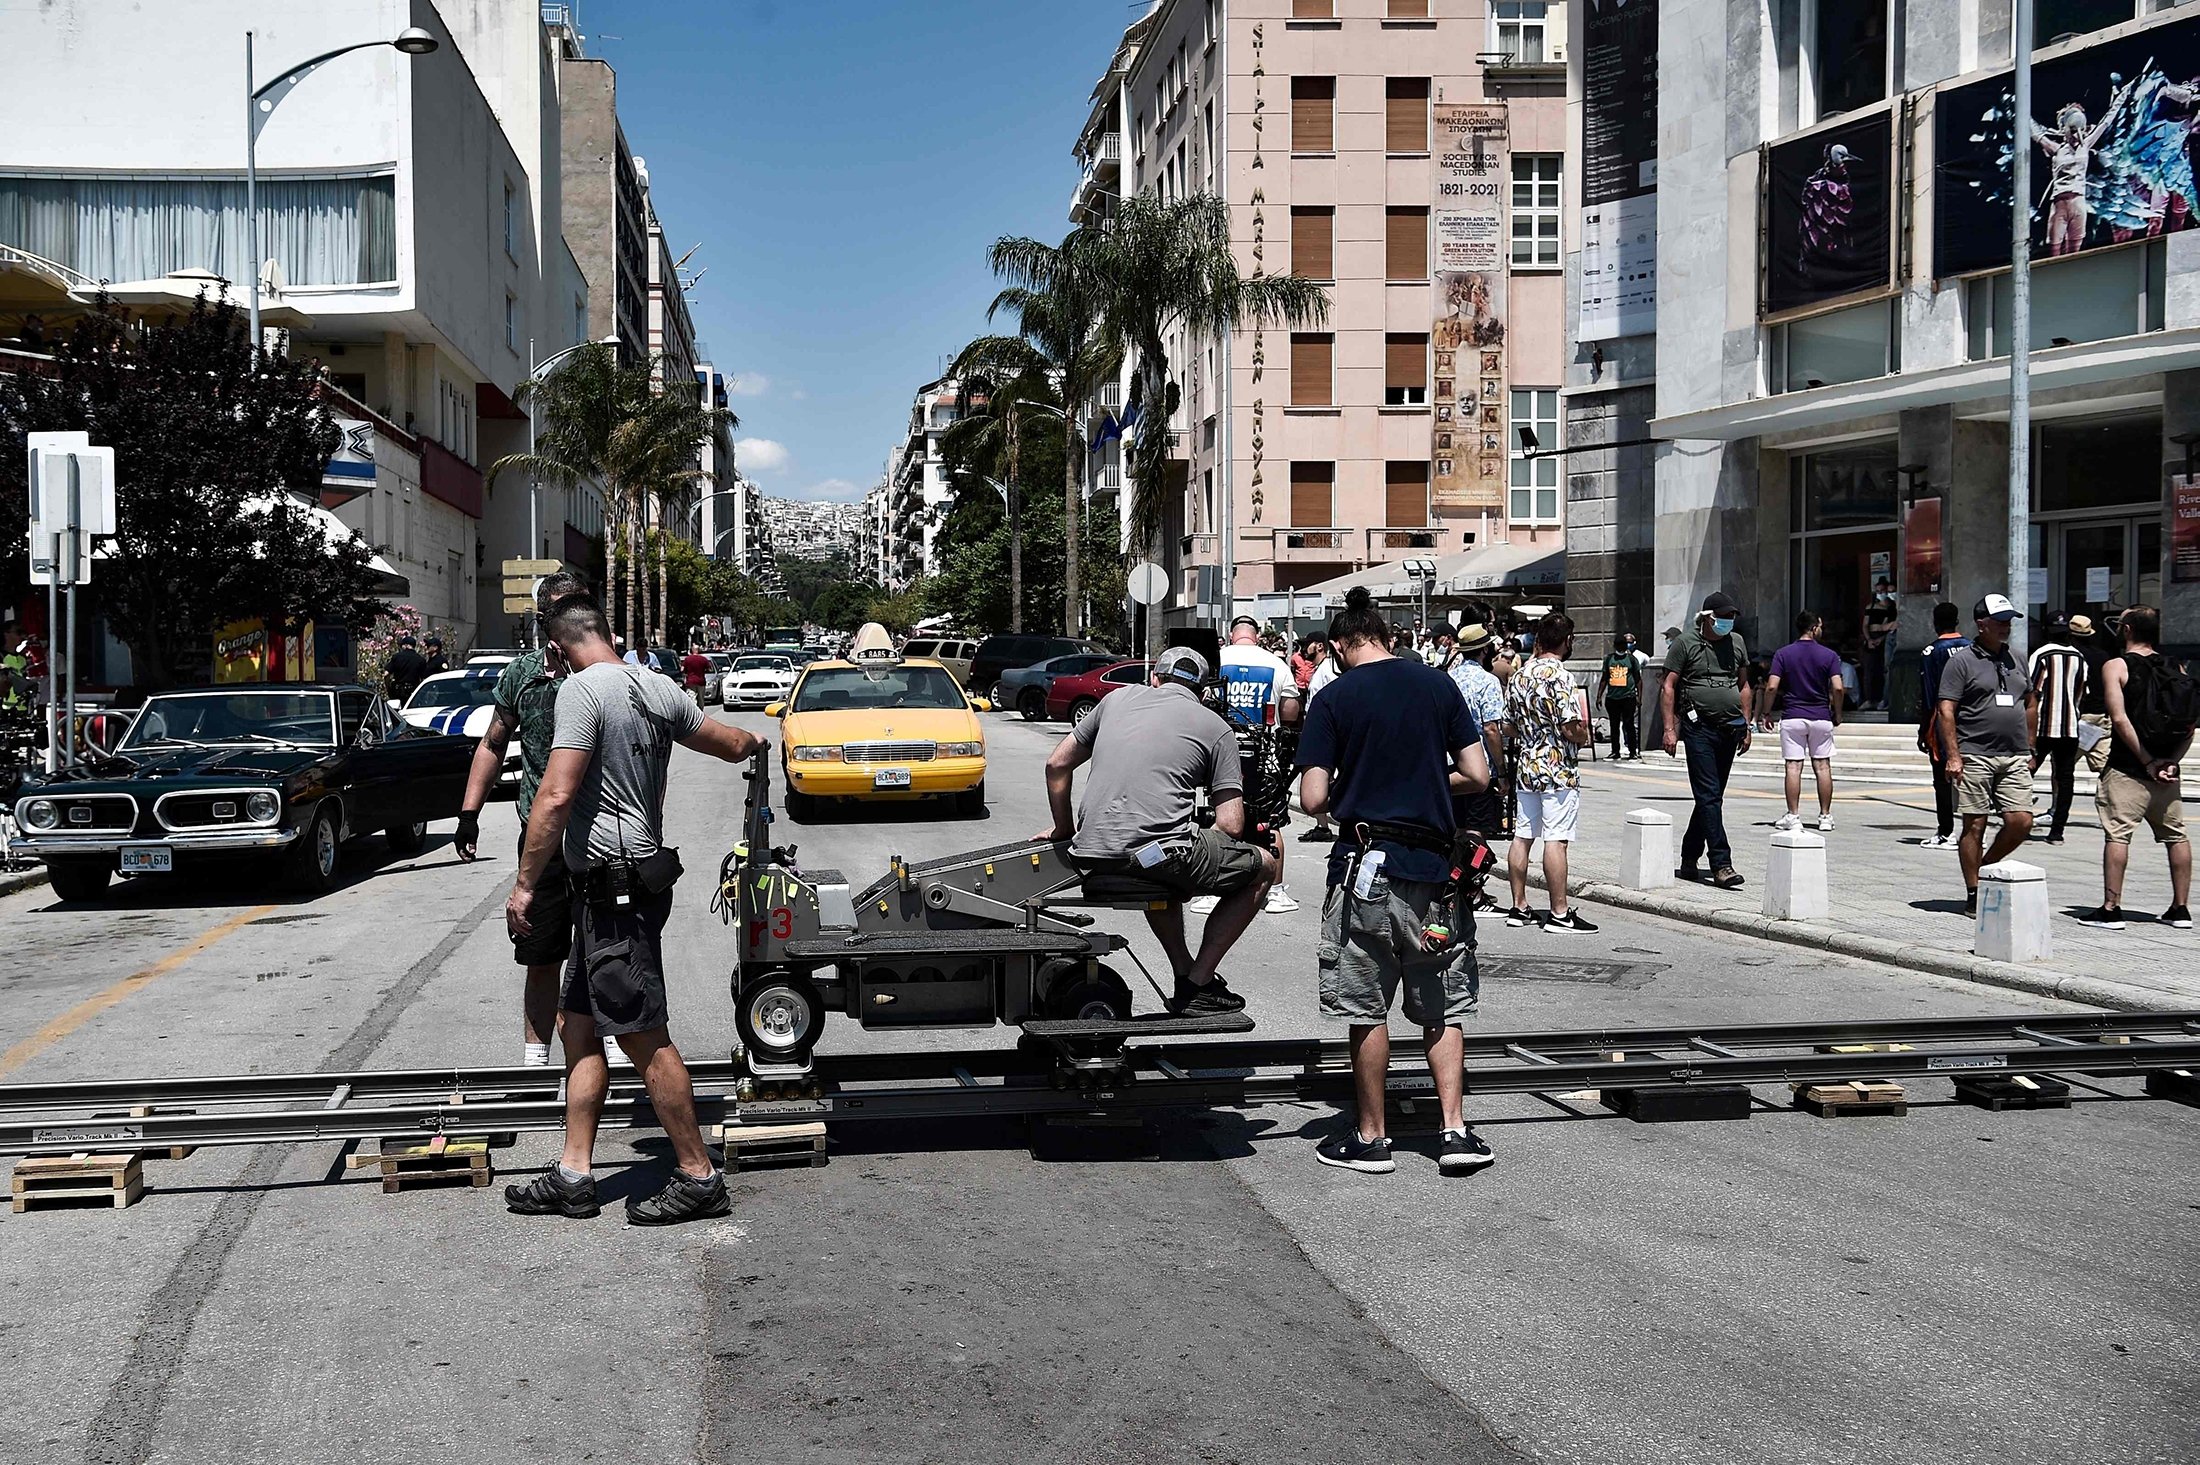 Film crew members work during the filming of the action thriller, "The Enforcer," starring Spanish actor, film director and producer Antonio Banderas, in a street of Thessaloniki, Greece, July 3, 2021. (AFP Photo)